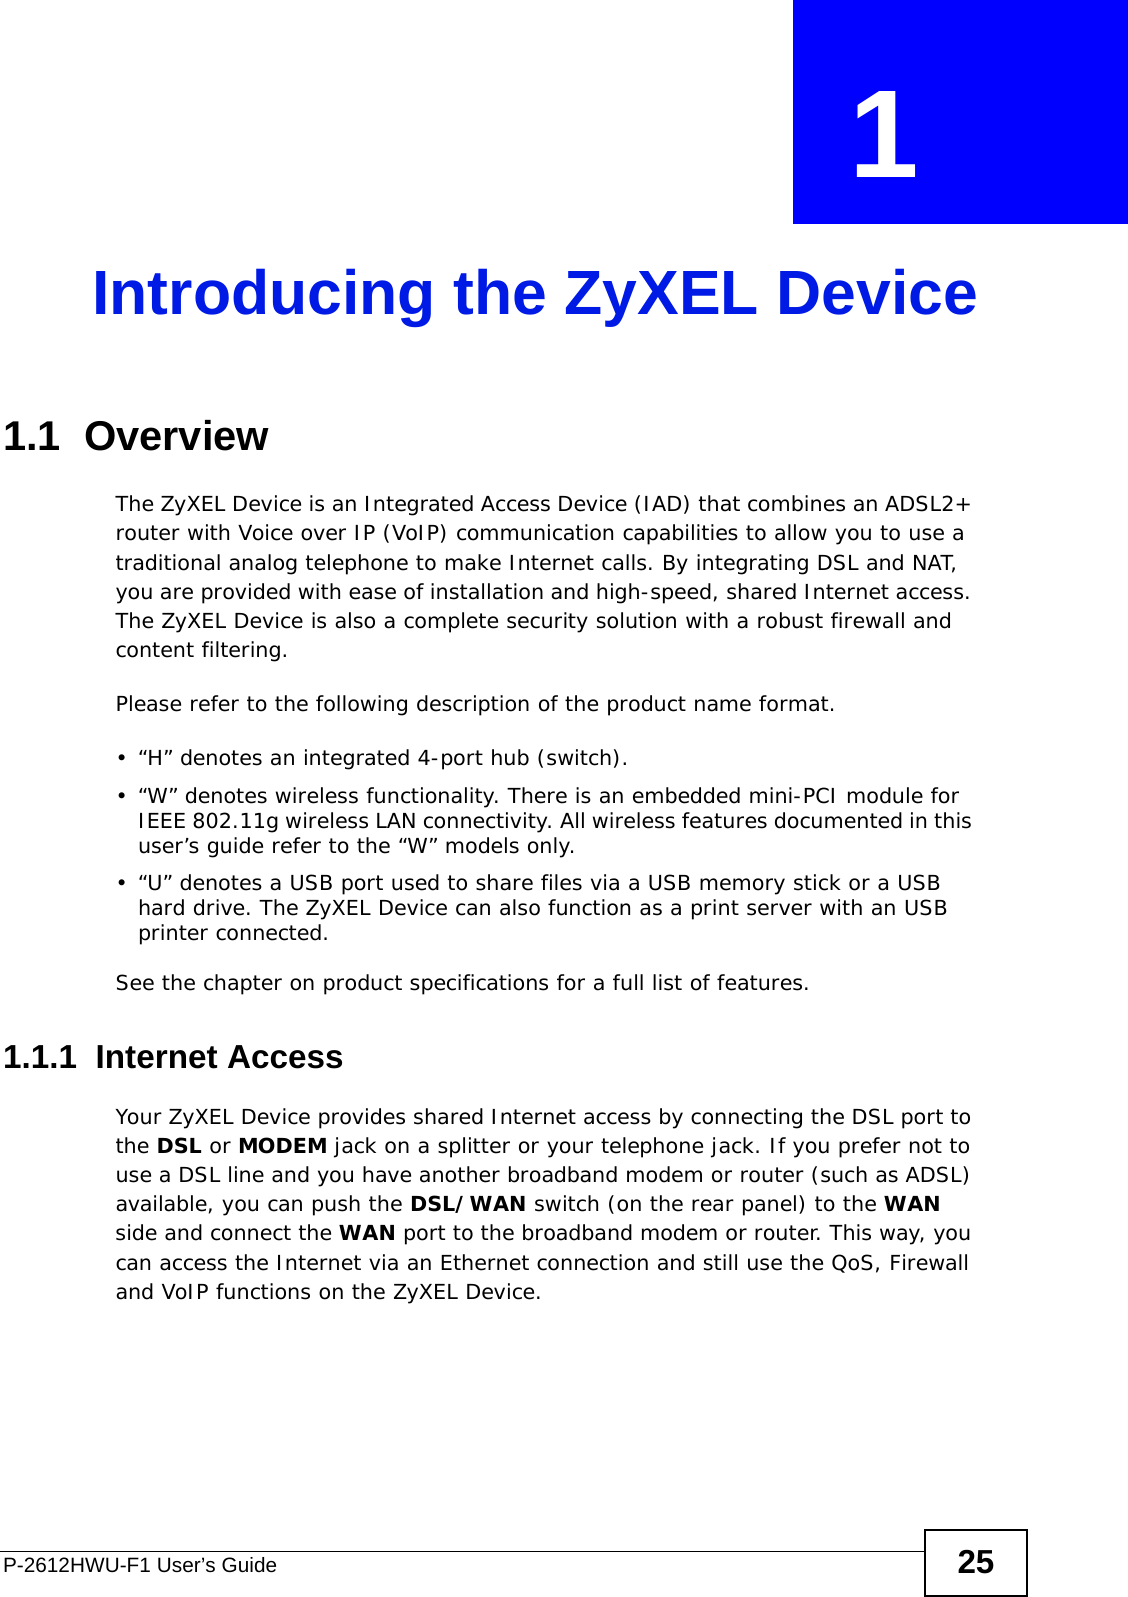 P-2612HWU-F1 User’s Guide 25CHAPTER  1 Introducing the ZyXEL Device1.1  OverviewThe ZyXEL Device is an Integrated Access Device (IAD) that combines an ADSL2+ router with Voice over IP (VoIP) communication capabilities to allow you to use a traditional analog telephone to make Internet calls. By integrating DSL and NAT, you are provided with ease of installation and high-speed, shared Internet access. The ZyXEL Device is also a complete security solution with a robust firewall and content filtering.Please refer to the following description of the product name format.• “H” denotes an integrated 4-port hub (switch).  • “W” denotes wireless functionality. There is an embedded mini-PCI module for IEEE 802.11g wireless LAN connectivity. All wireless features documented in this user’s guide refer to the “W” models only.• “U” denotes a USB port used to share files via a USB memory stick or a USB hard drive. The ZyXEL Device can also function as a print server with an USB printer connected.See the chapter on product specifications for a full list of features.1.1.1  Internet AccessYour ZyXEL Device provides shared Internet access by connecting the DSL port to the DSL or MODEM jack on a splitter or your telephone jack. If you prefer not to use a DSL line and you have another broadband modem or router (such as ADSL) available, you can push the DSL/WAN switch (on the rear panel) to the WAN side and connect the WAN port to the broadband modem or router. This way, you can access the Internet via an Ethernet connection and still use the QoS, Firewall and VoIP functions on the ZyXEL Device.